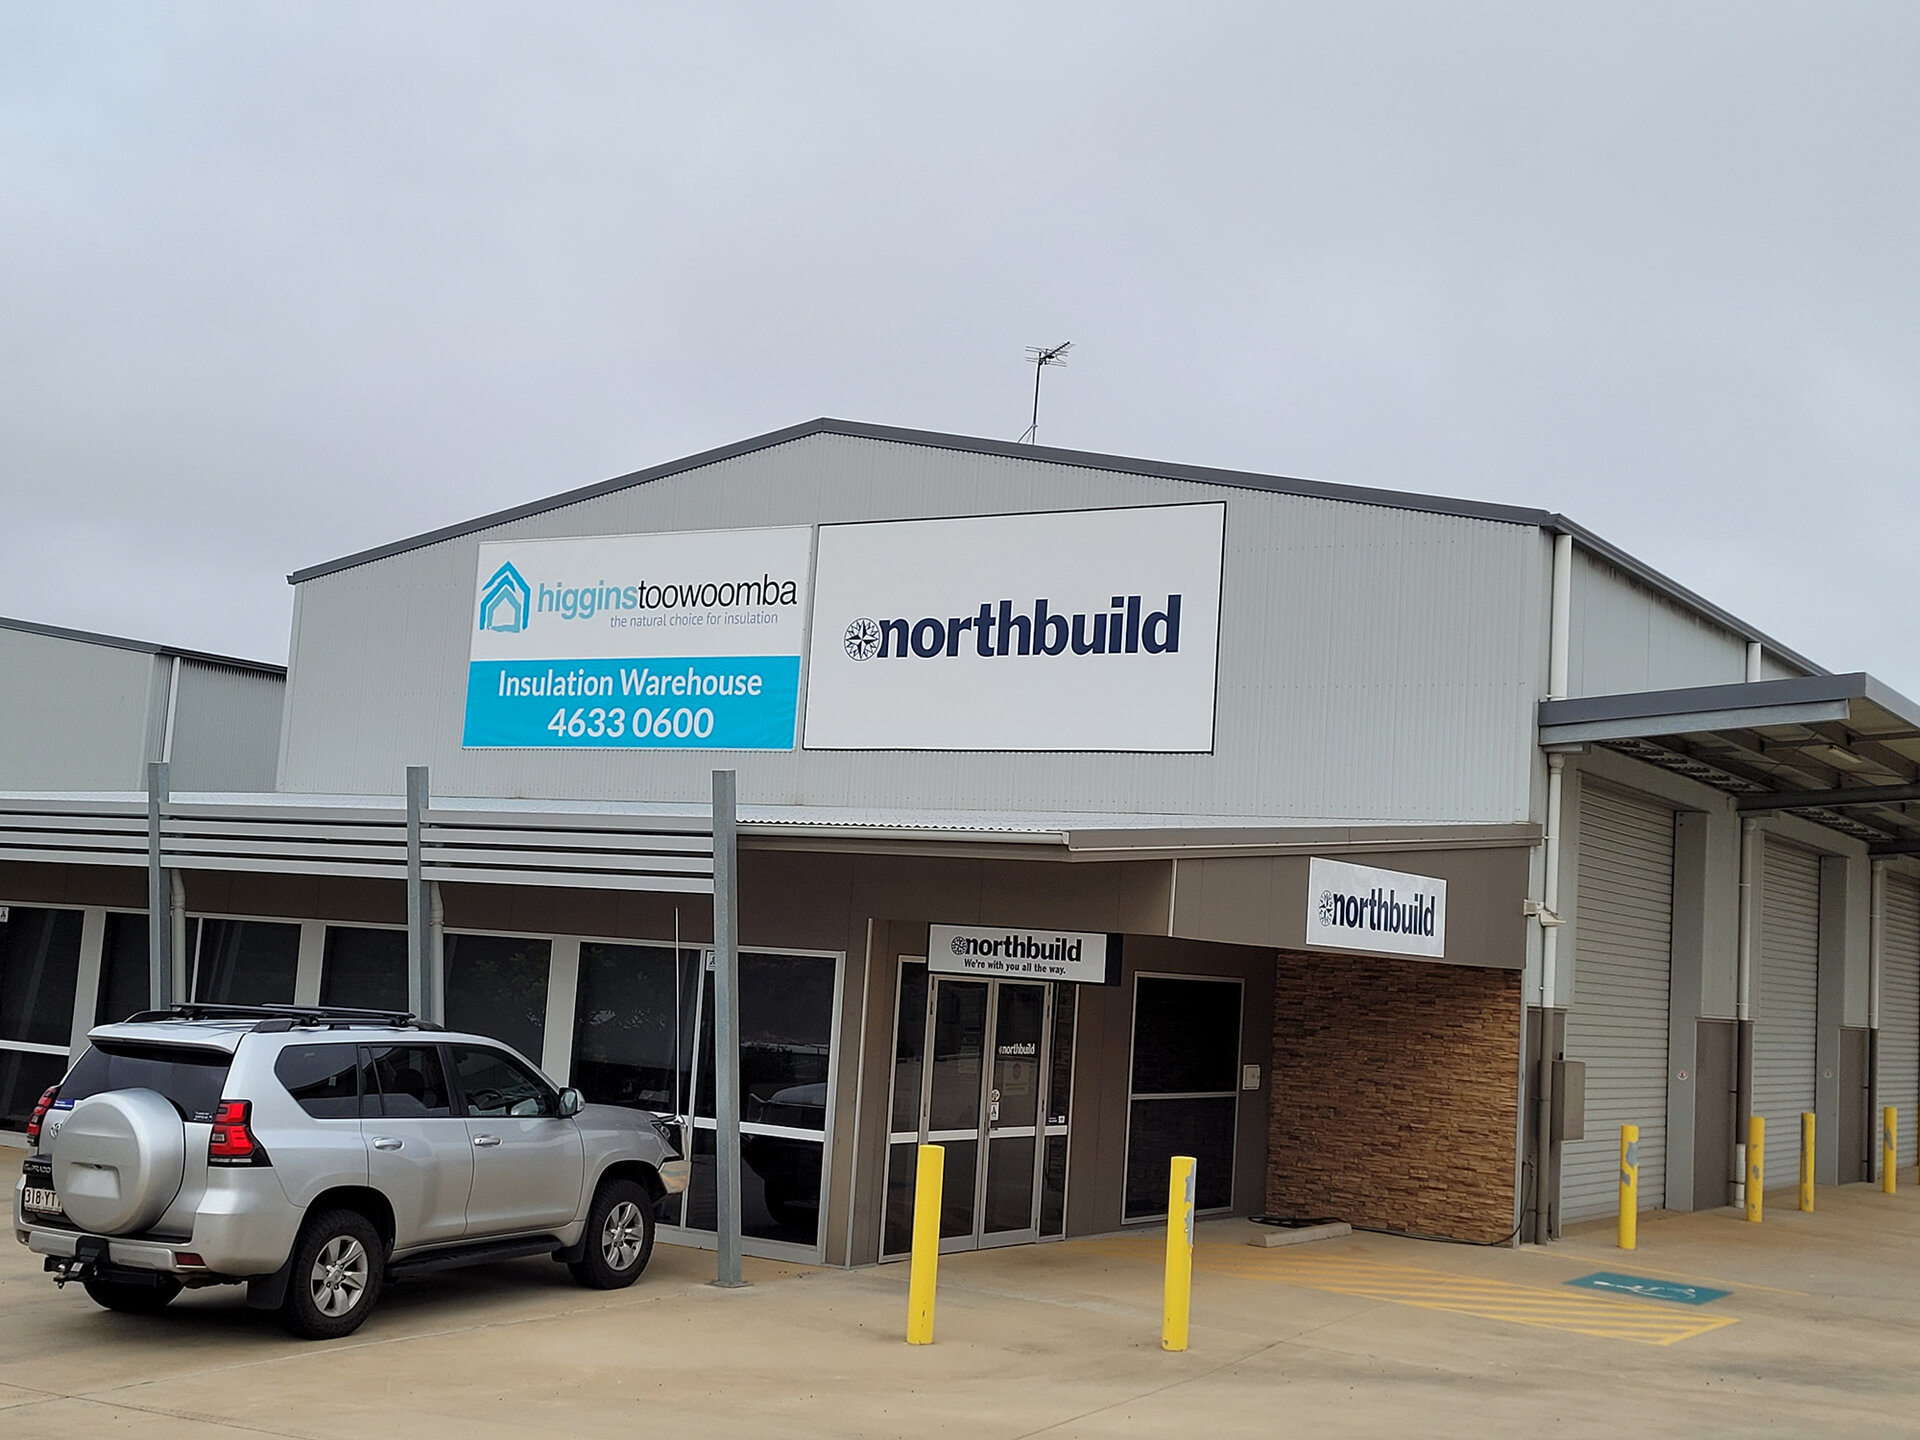 Exterior of Northbuild's new Toowoomba based location on Greenwattle Street